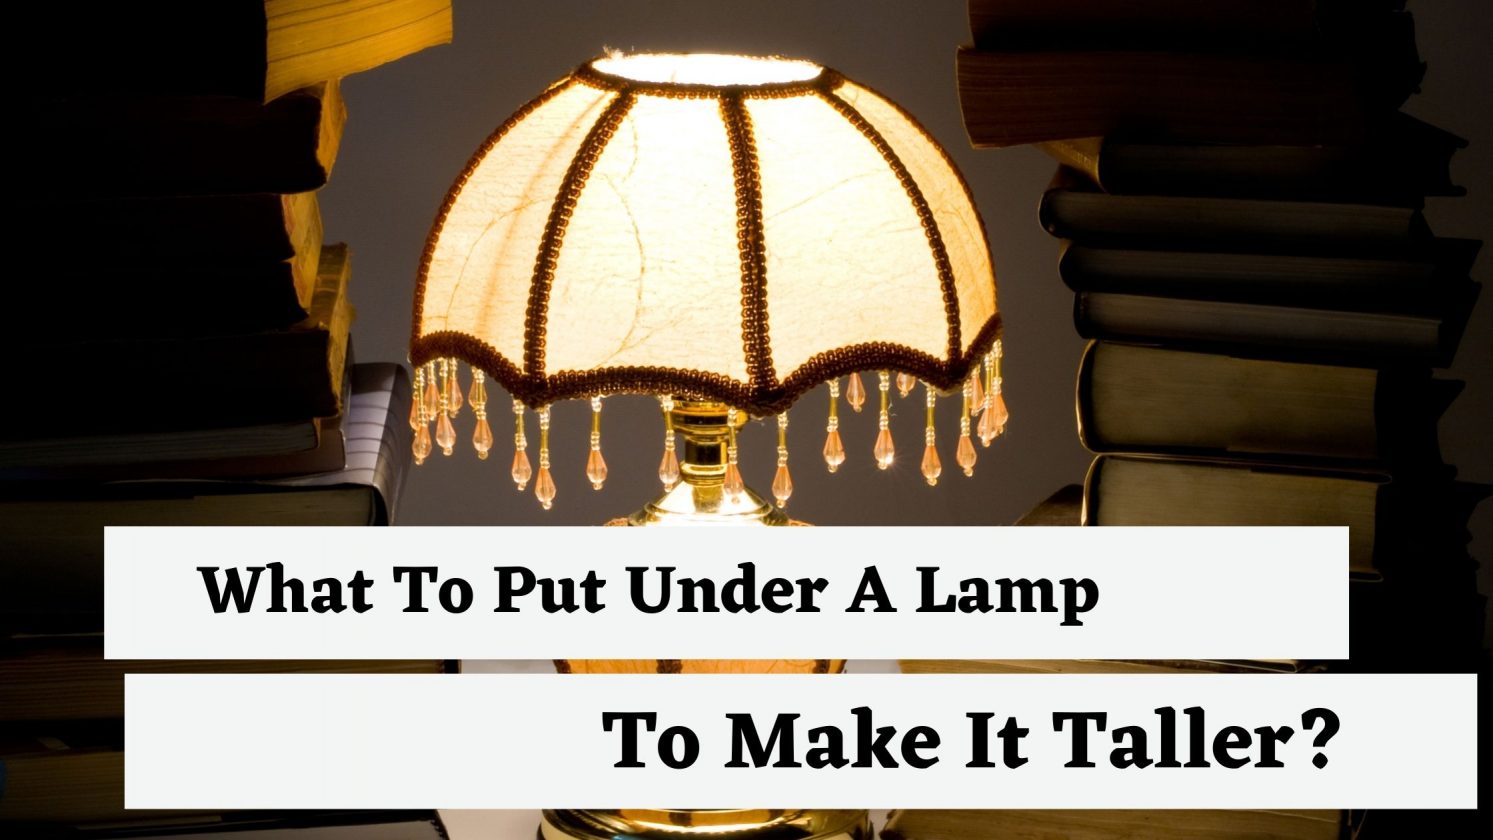 What To Put Under A Lamp To Make It Taller?